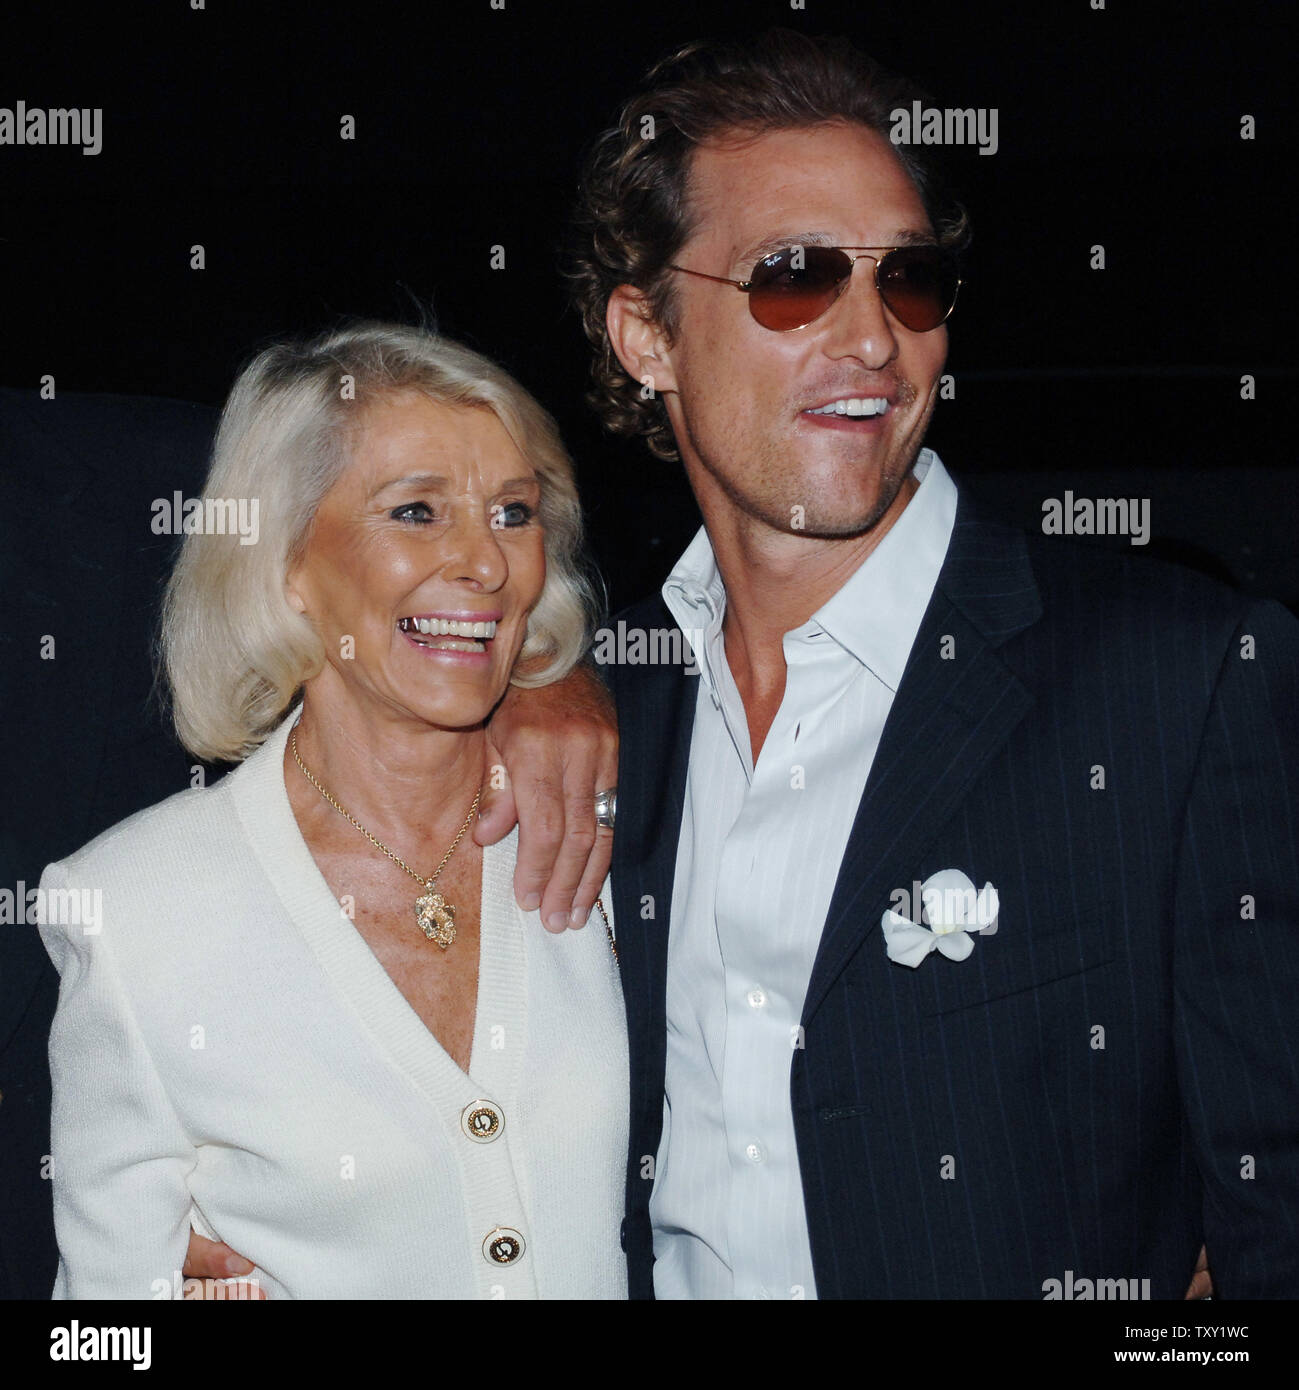 Actor Matthew McConaughey, one of the stars of the new motion picture drama 'Two for the Money' and wearing a magnolia in his lapel in support of hurricane victims, arrives with his mother Kay at the film's premiere in Beverly Hills September 26, 2005. The film also stars Al Pacino, Rene Russo and Jaime King and is about a former college football star who suffers a career-ending injury and aligns himself with one of the most renowned bookies in the sports gambling business. The movie opens October 7 in the United States.   (UPI Photo/Jim Ruymen) Stock Photo